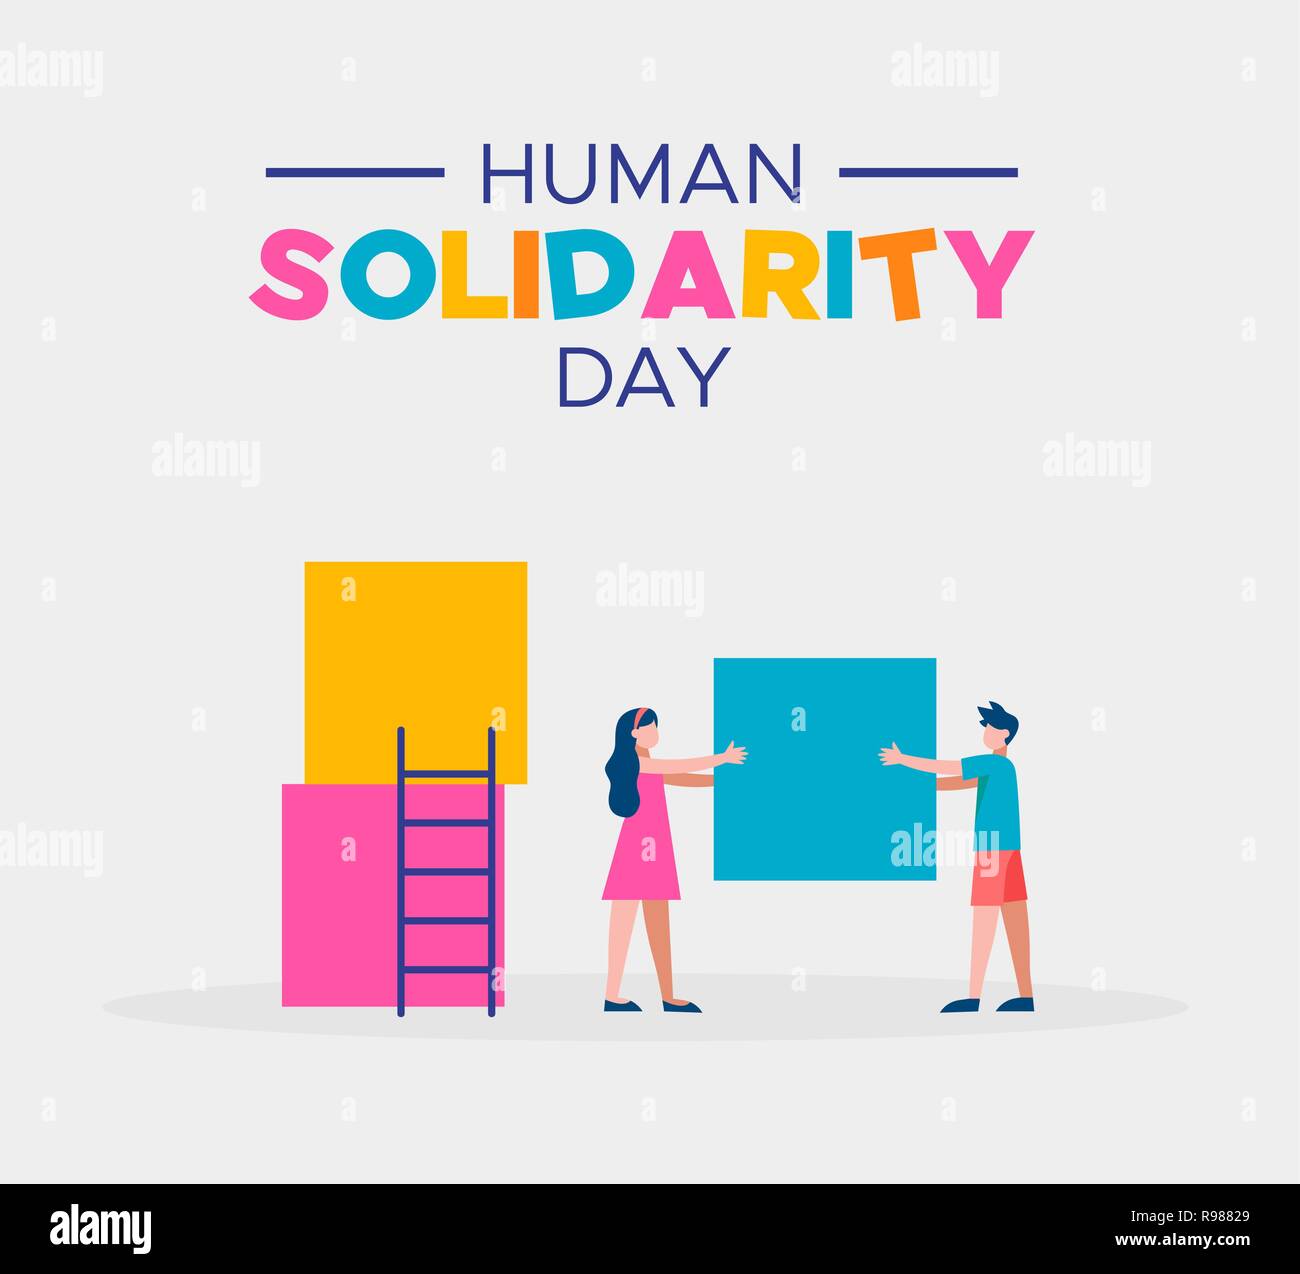 International Human Solidarity Day illustration of children helping each other for community help, social support concept. Stock Vector